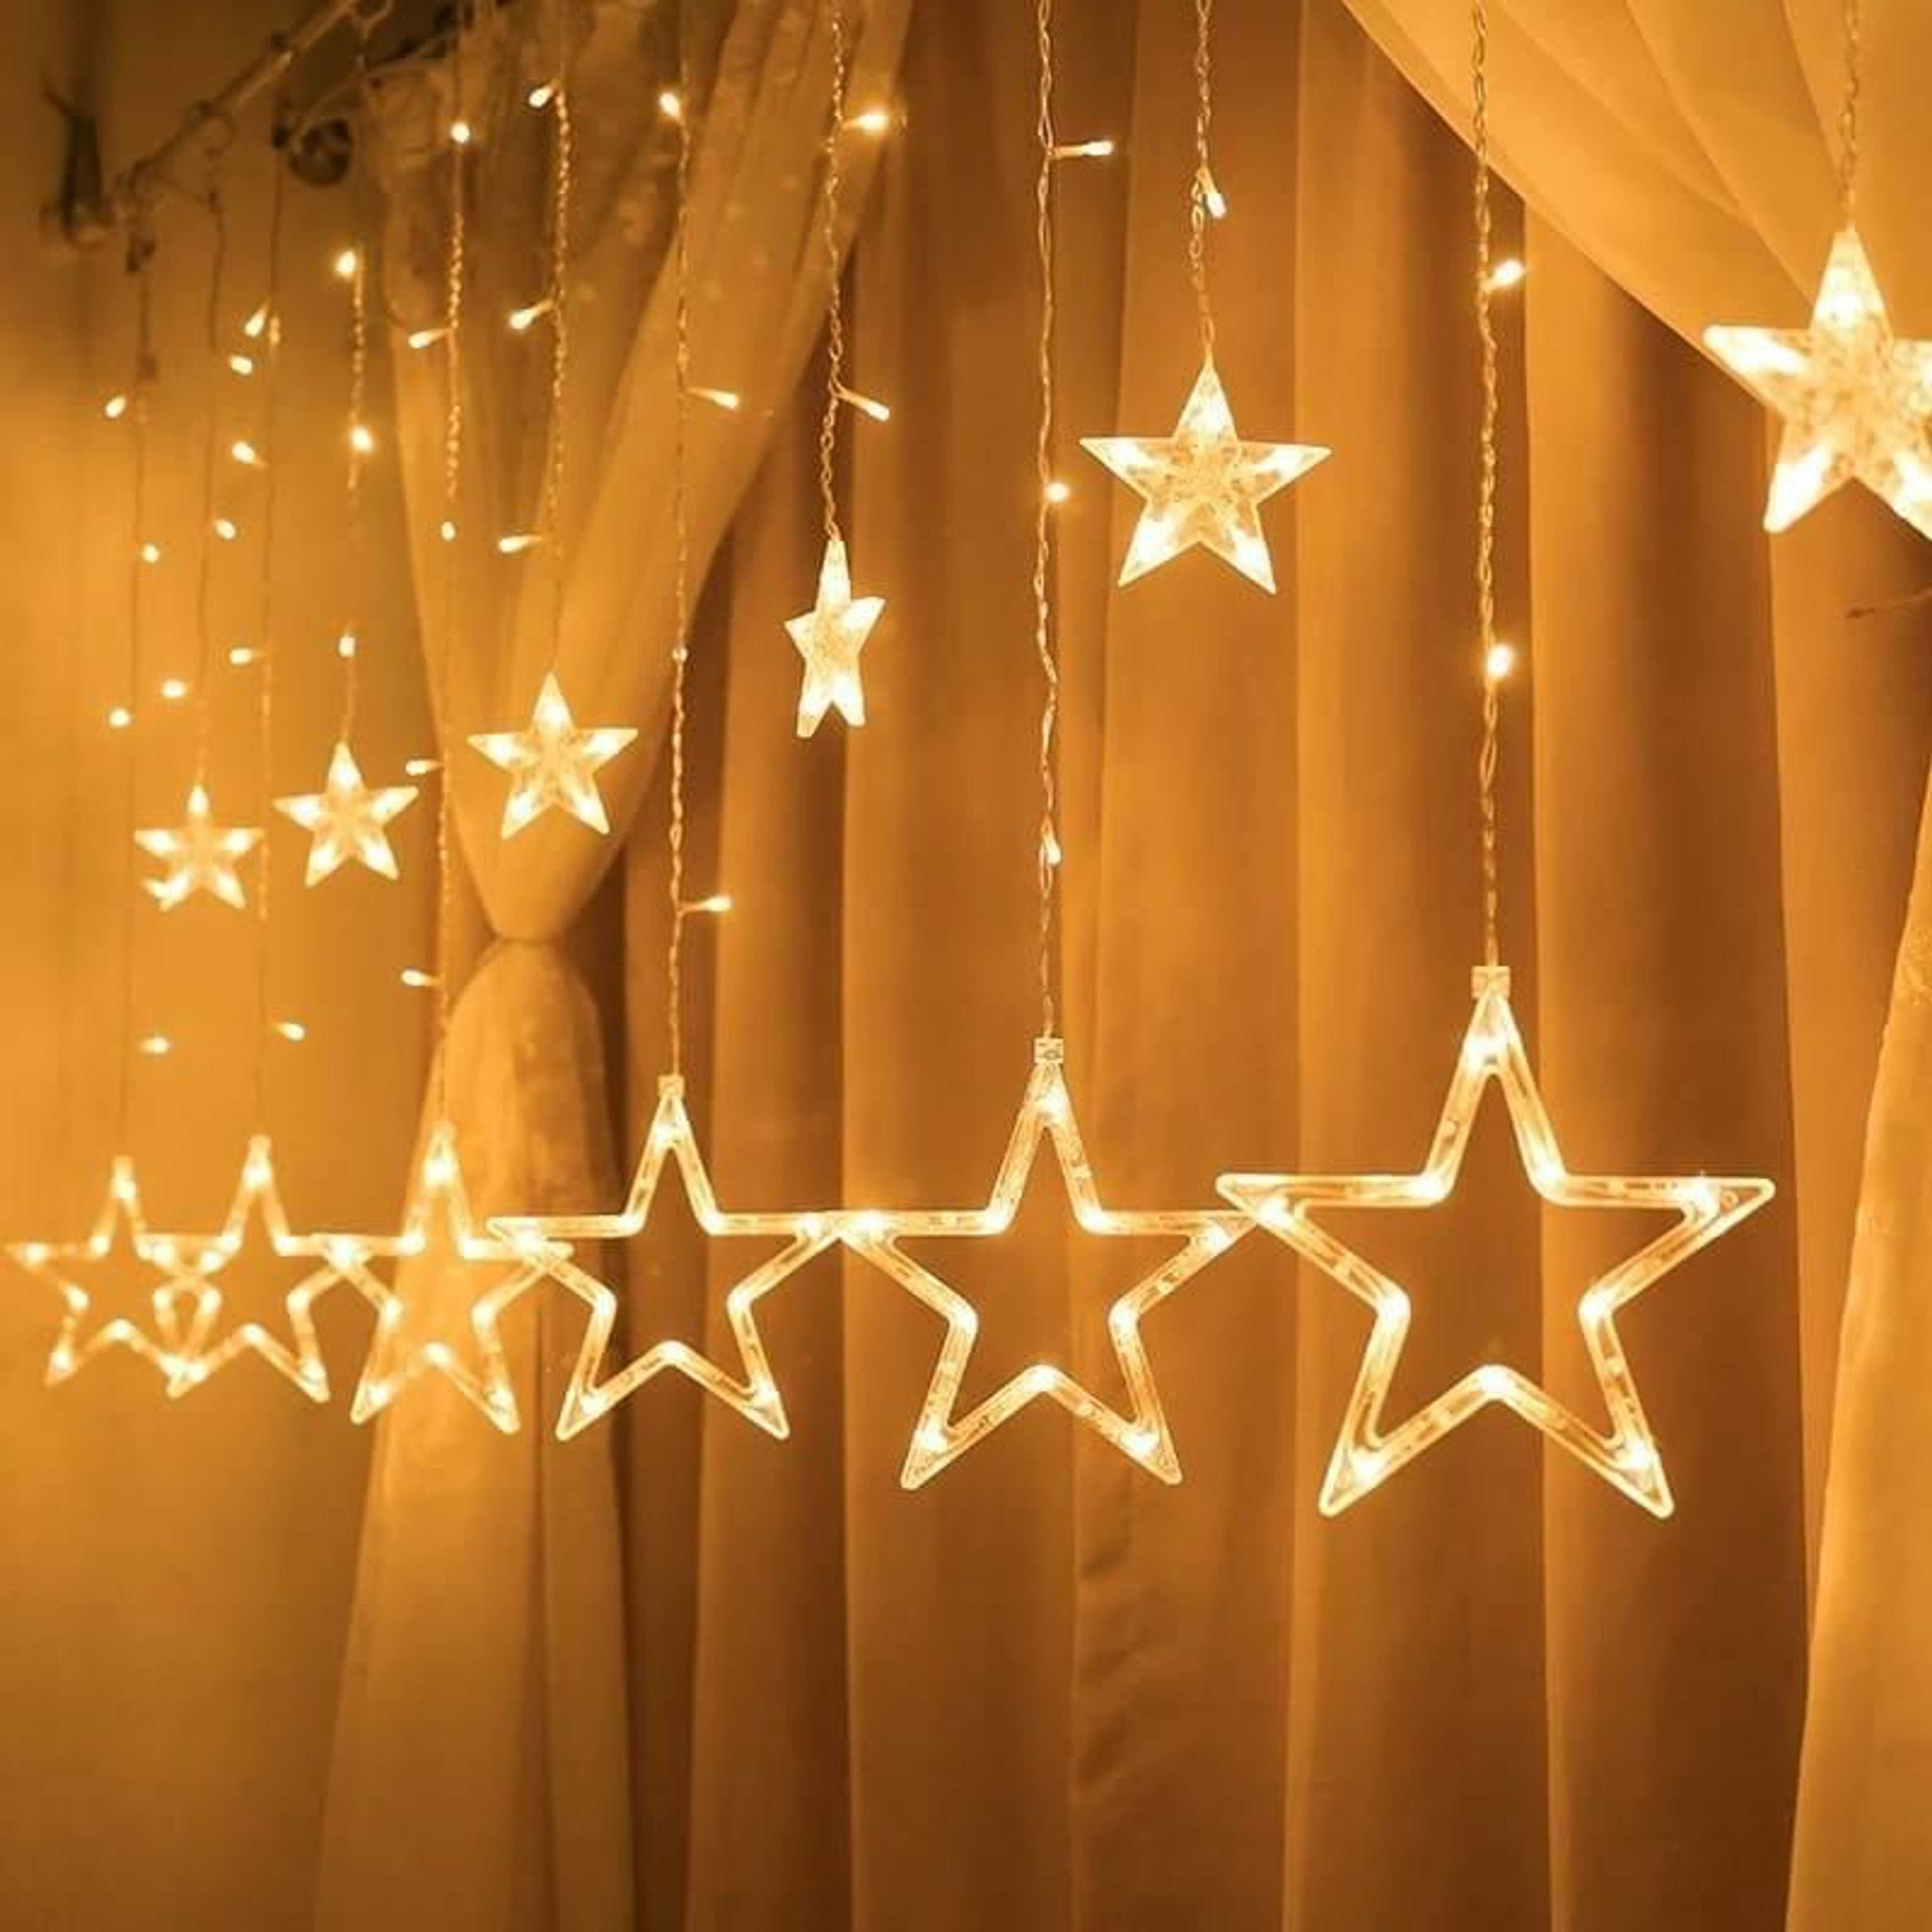 Fairy Lights Star LED Curtain String 12 Strings in 1 Curtain 6 Big 6 Small Stars Warm Golden Lights Plug one With 8 Different Modes Controller 2.5 Meters Limited Edition By Rainbow Zone